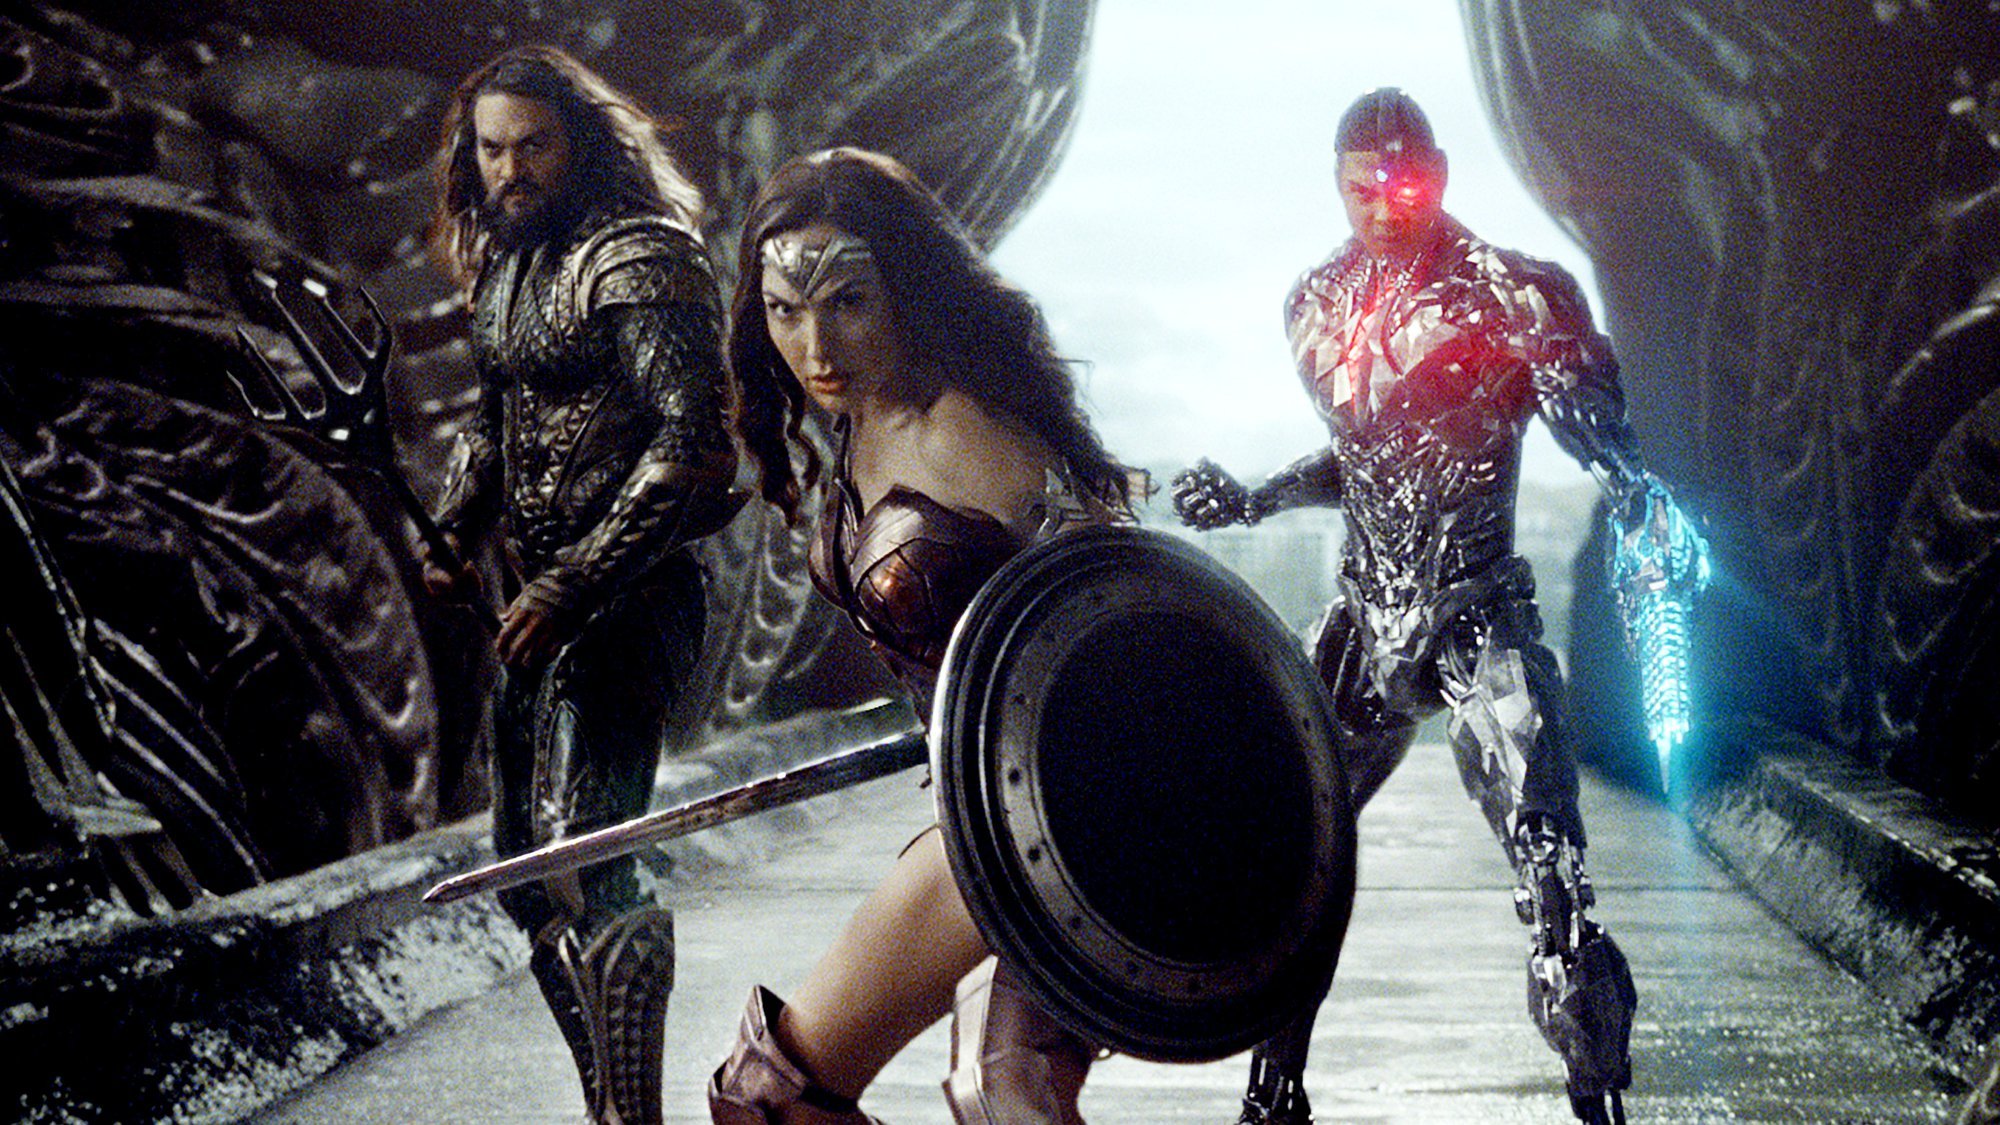 Jason Momoa, Gal Gadot and Ray Fisher in Warner Bros. Pictures' Justice League (2017)